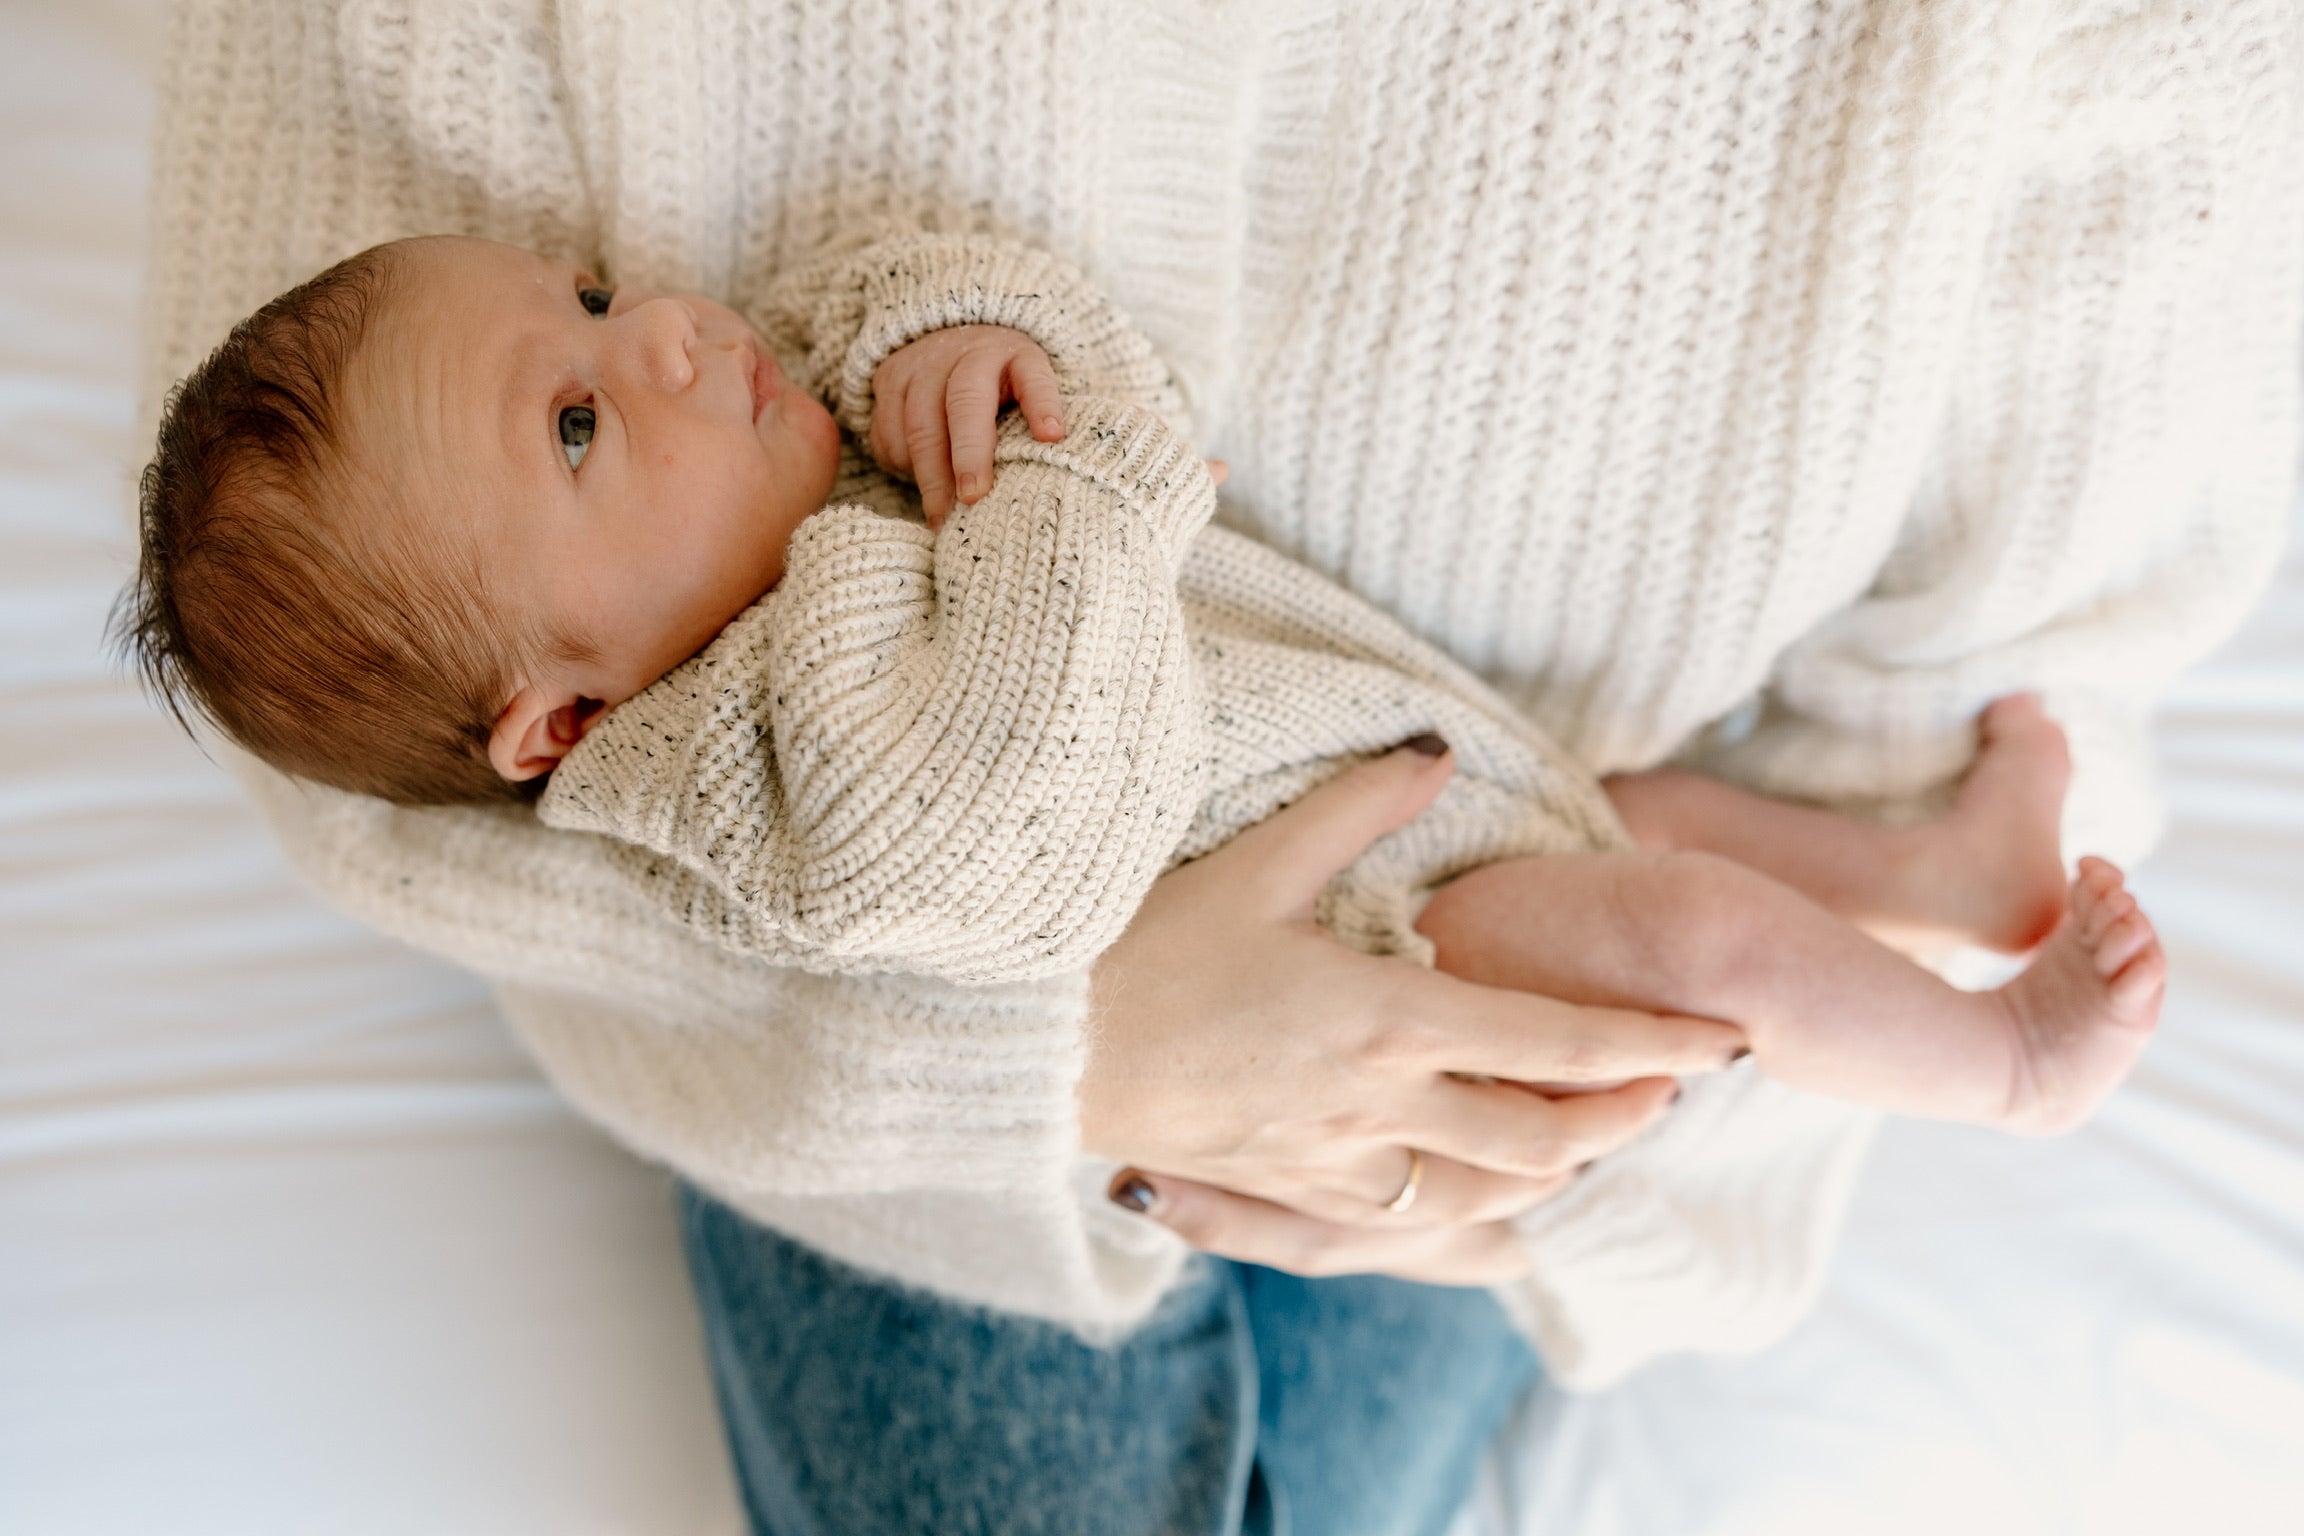 Winnie + Crew comfortable and stylish clothing for newborn photos